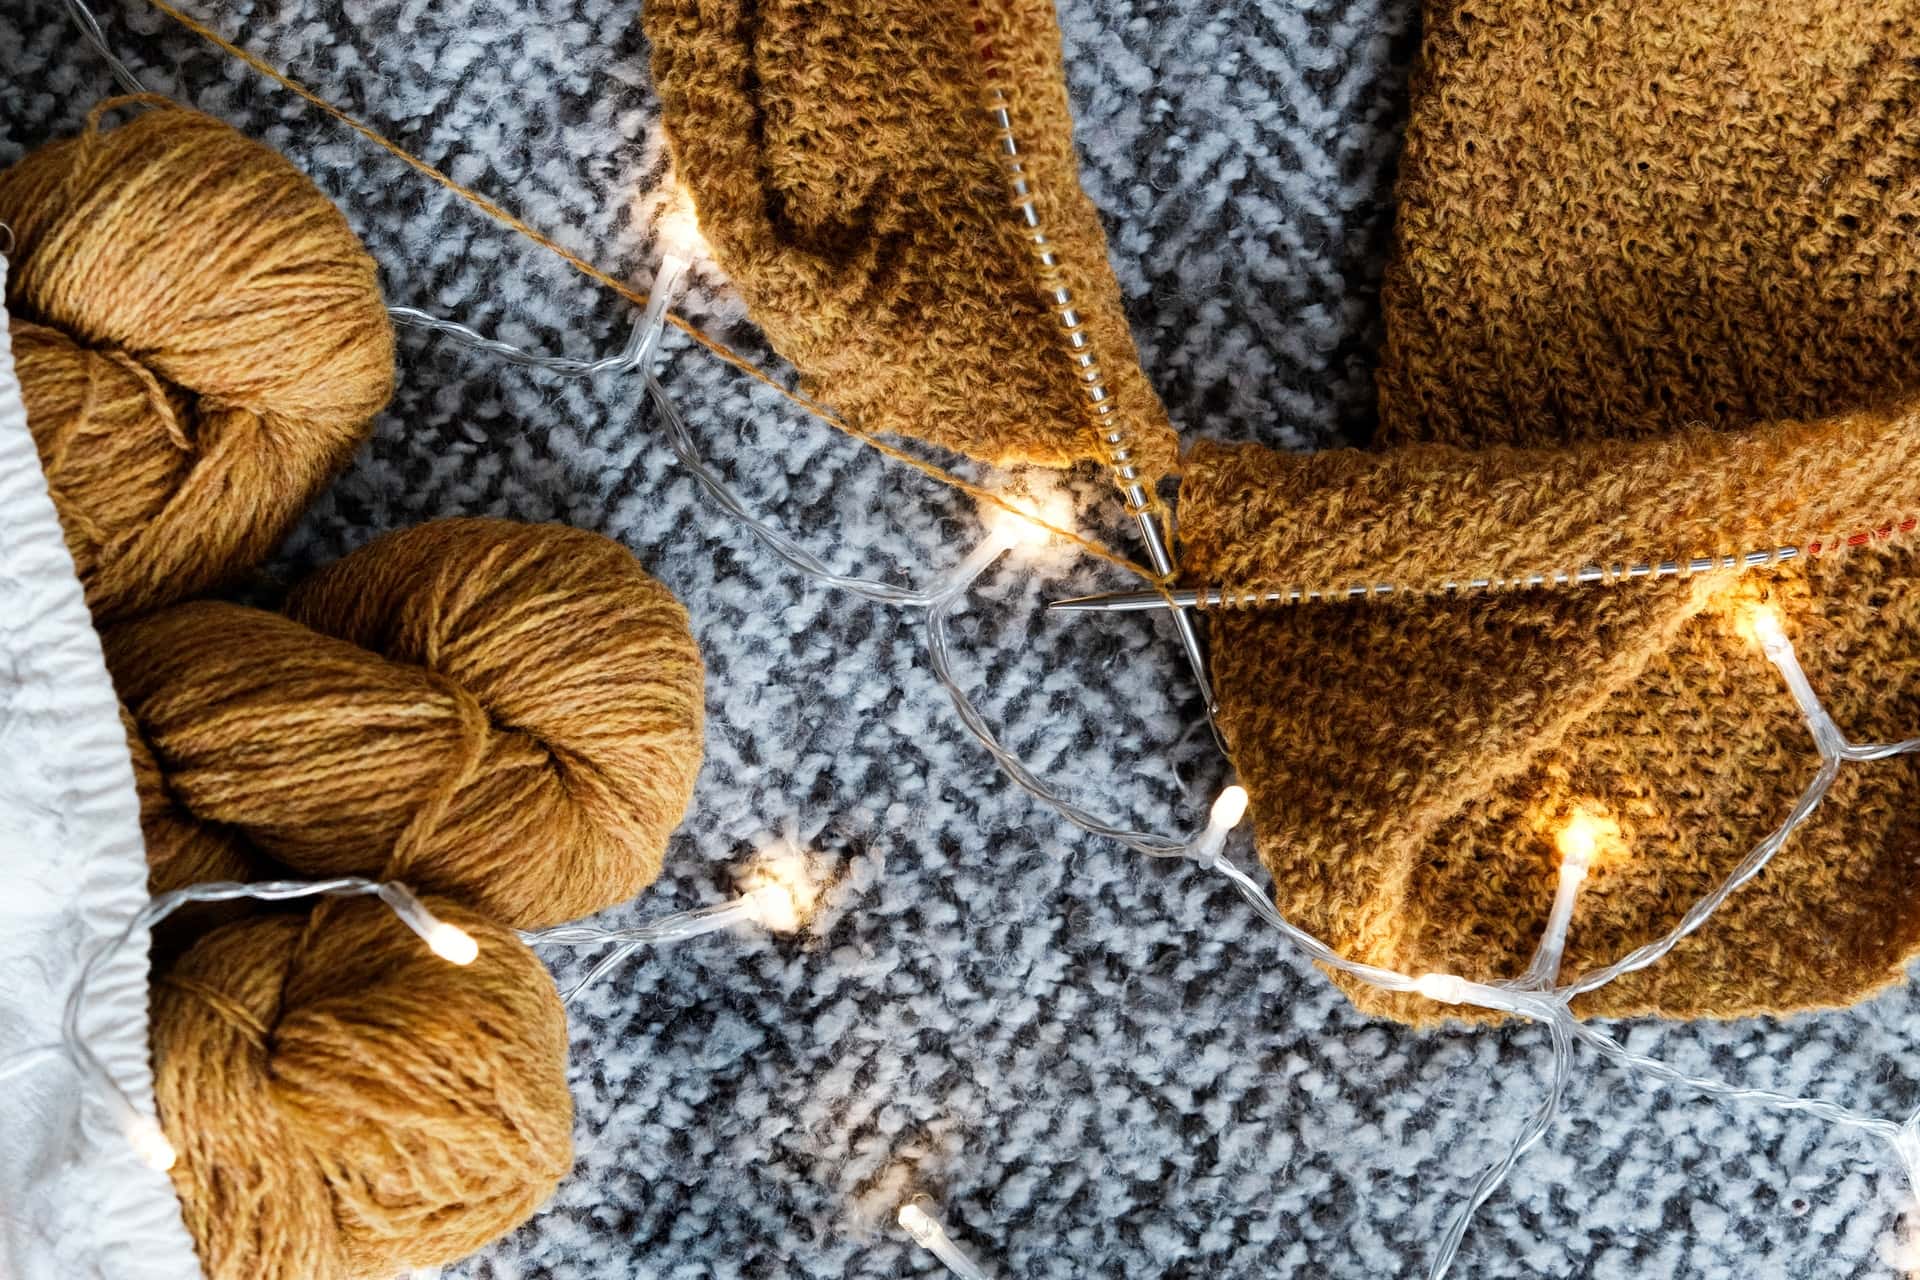 Why Does My Knitting Look Bad? - 10 Common Mistakes (And How to Fix Them)